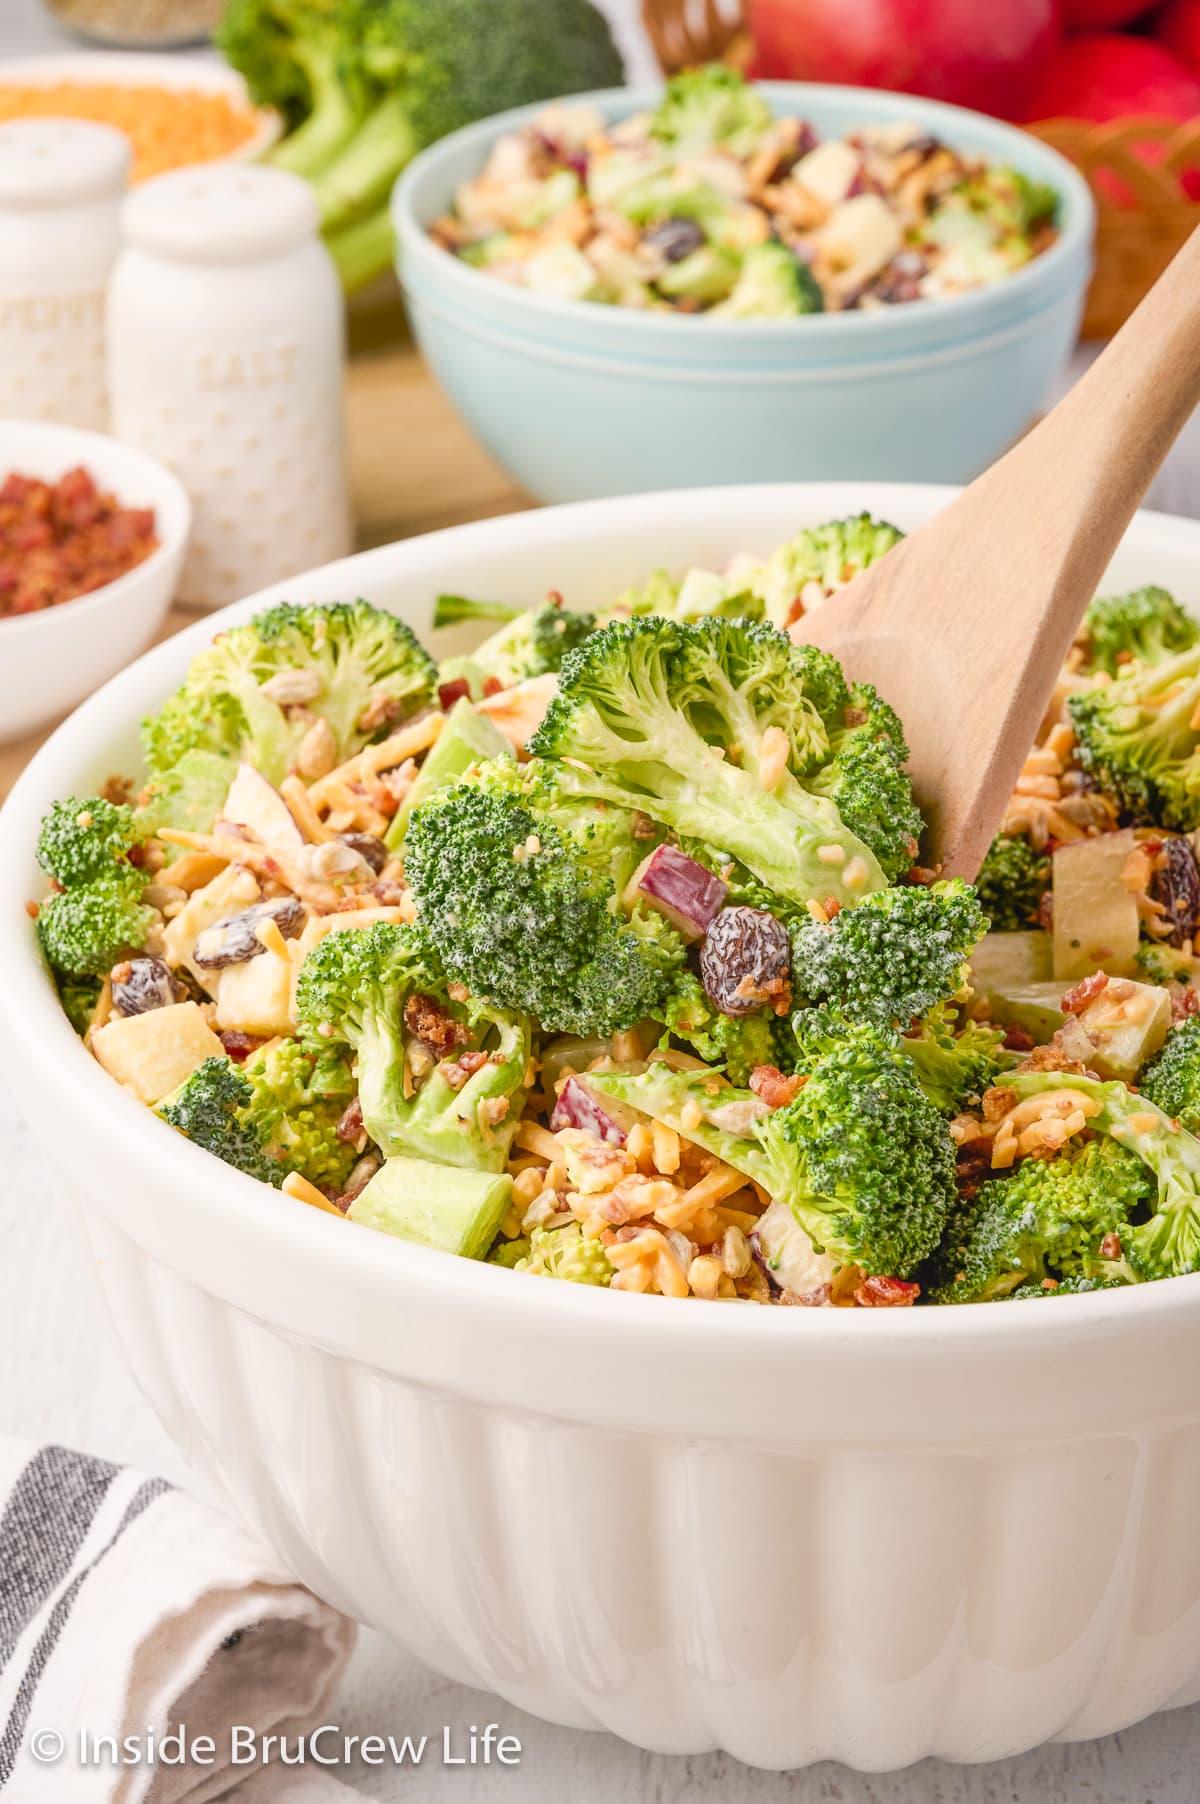 A large white bowl filled with broccoli salad.